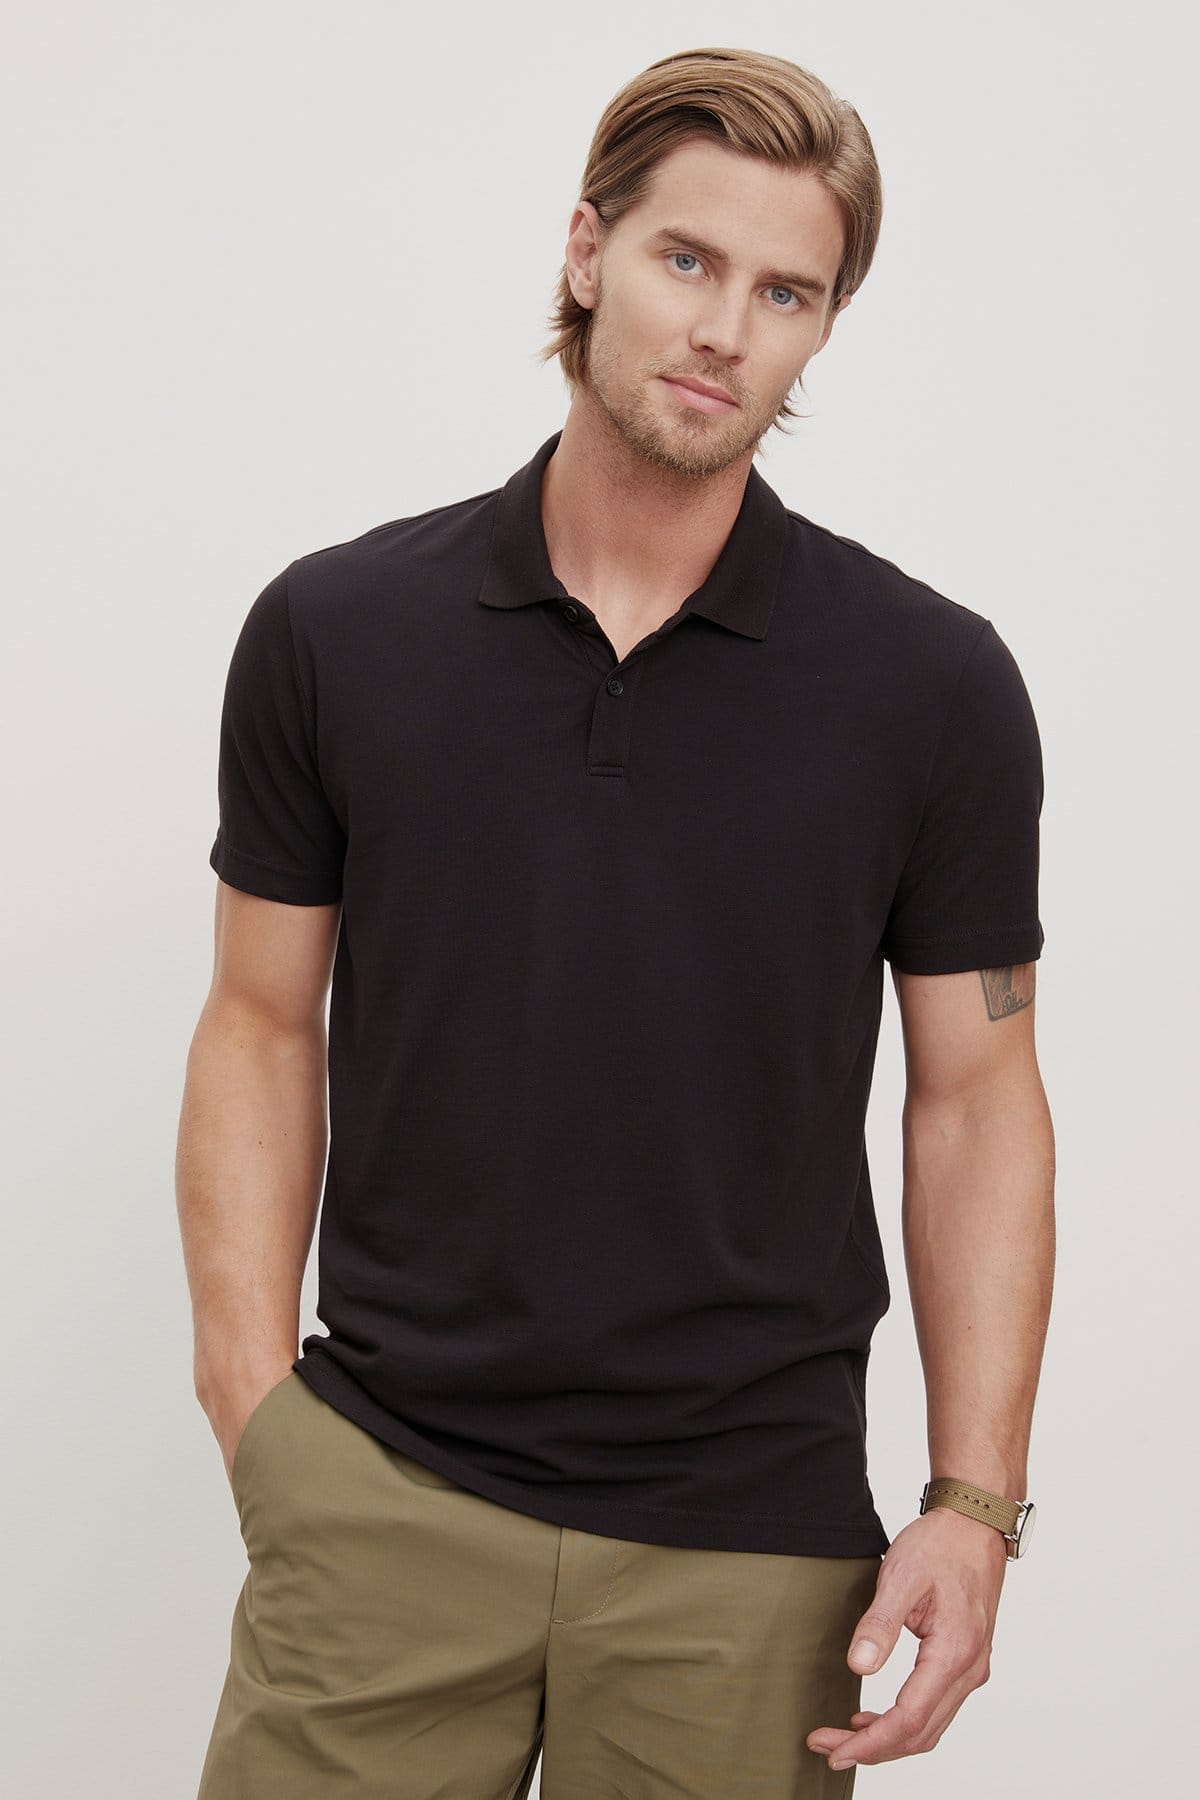 Model wearing the Willis Polo